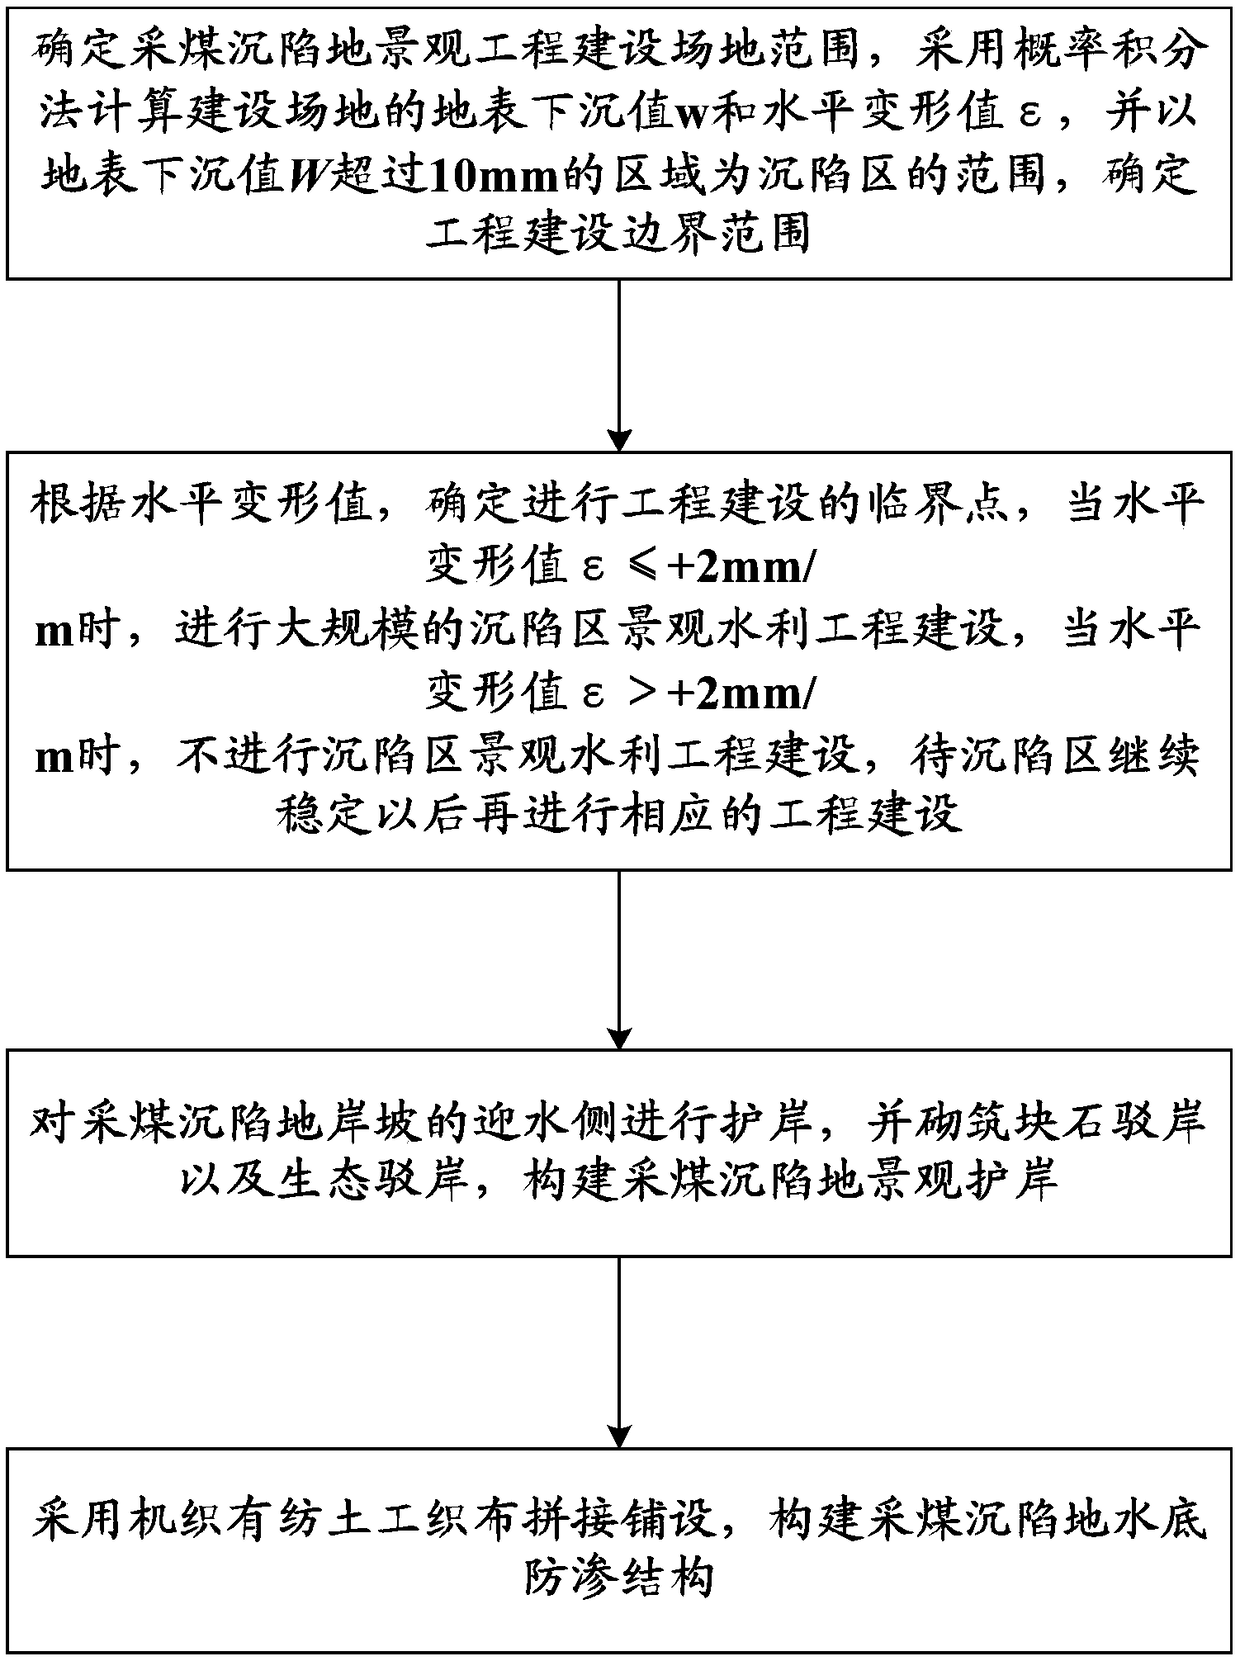 Construction method for landscape bank protection and water bottom seepage prevention of coal mining subsidence land